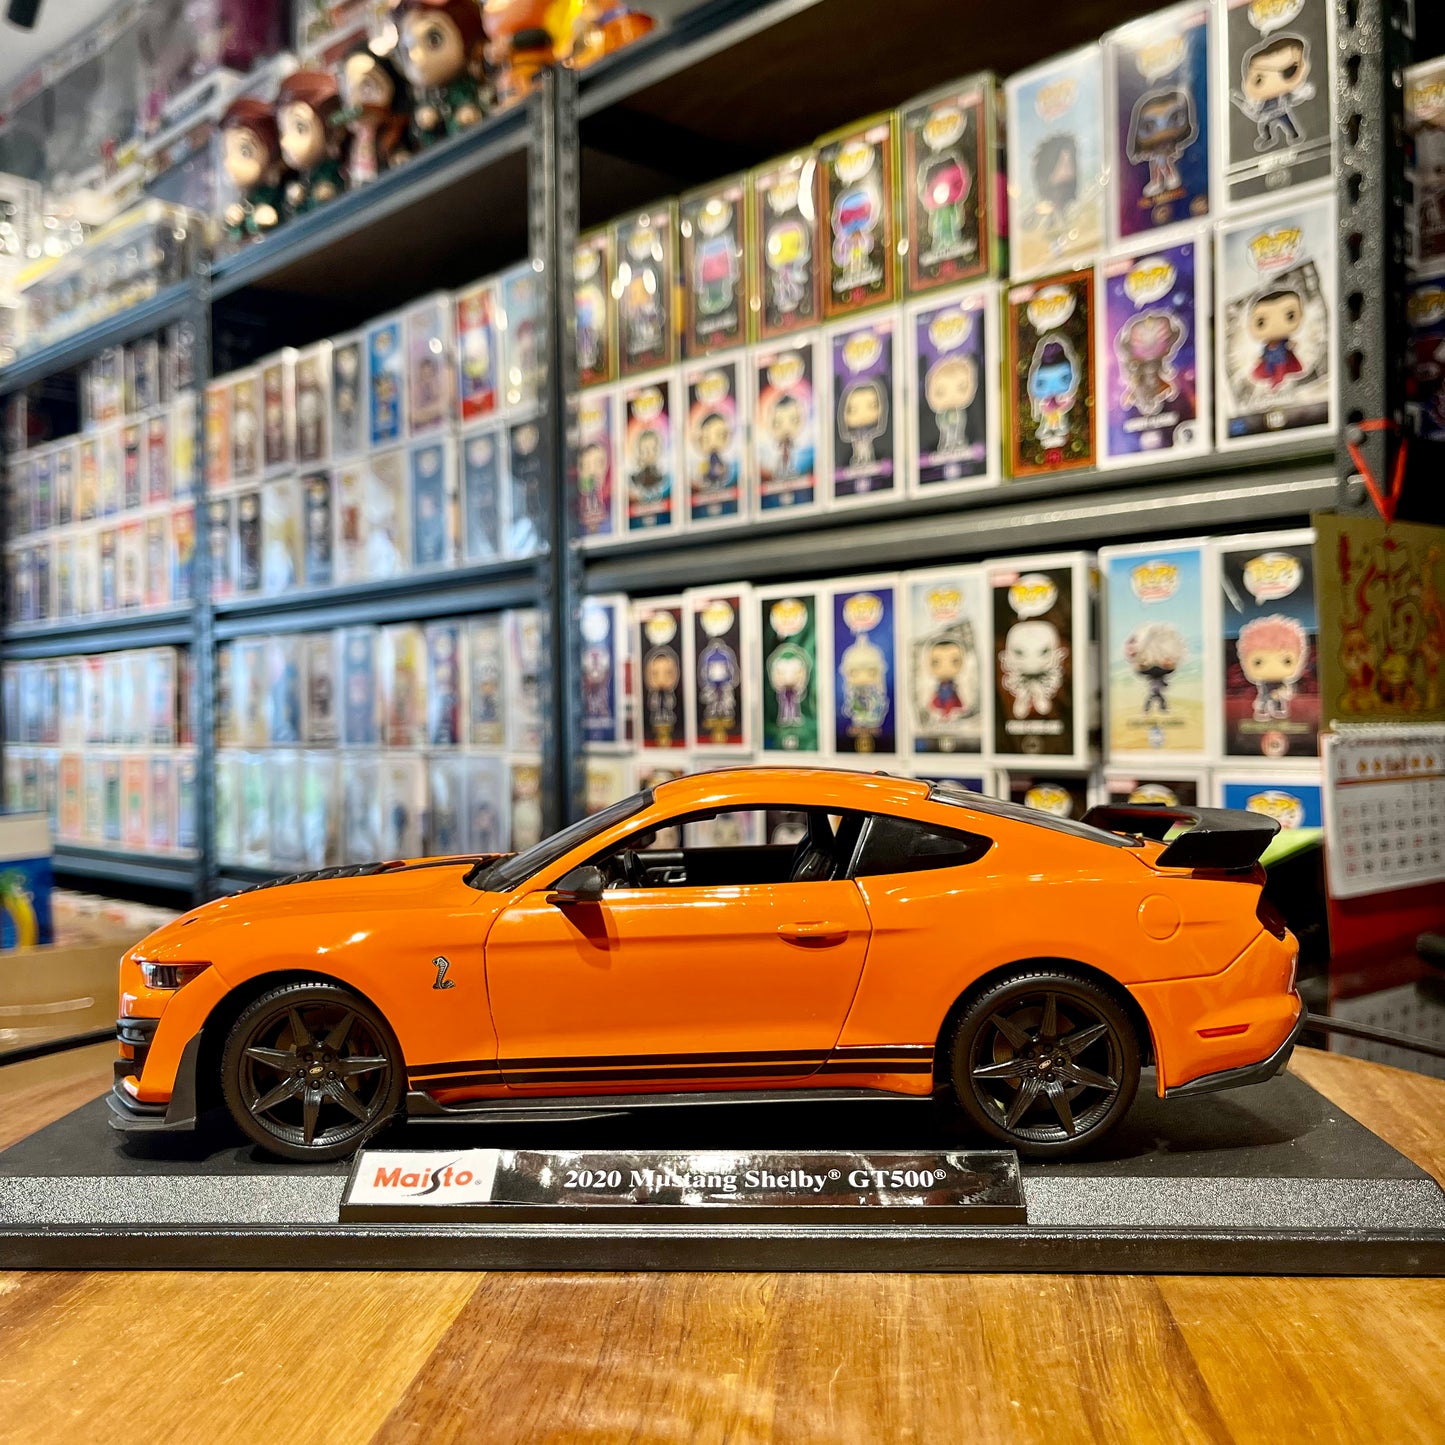 Maisto: 2020 Mustang Shelby GT500 (Orange) 1:18 Scale